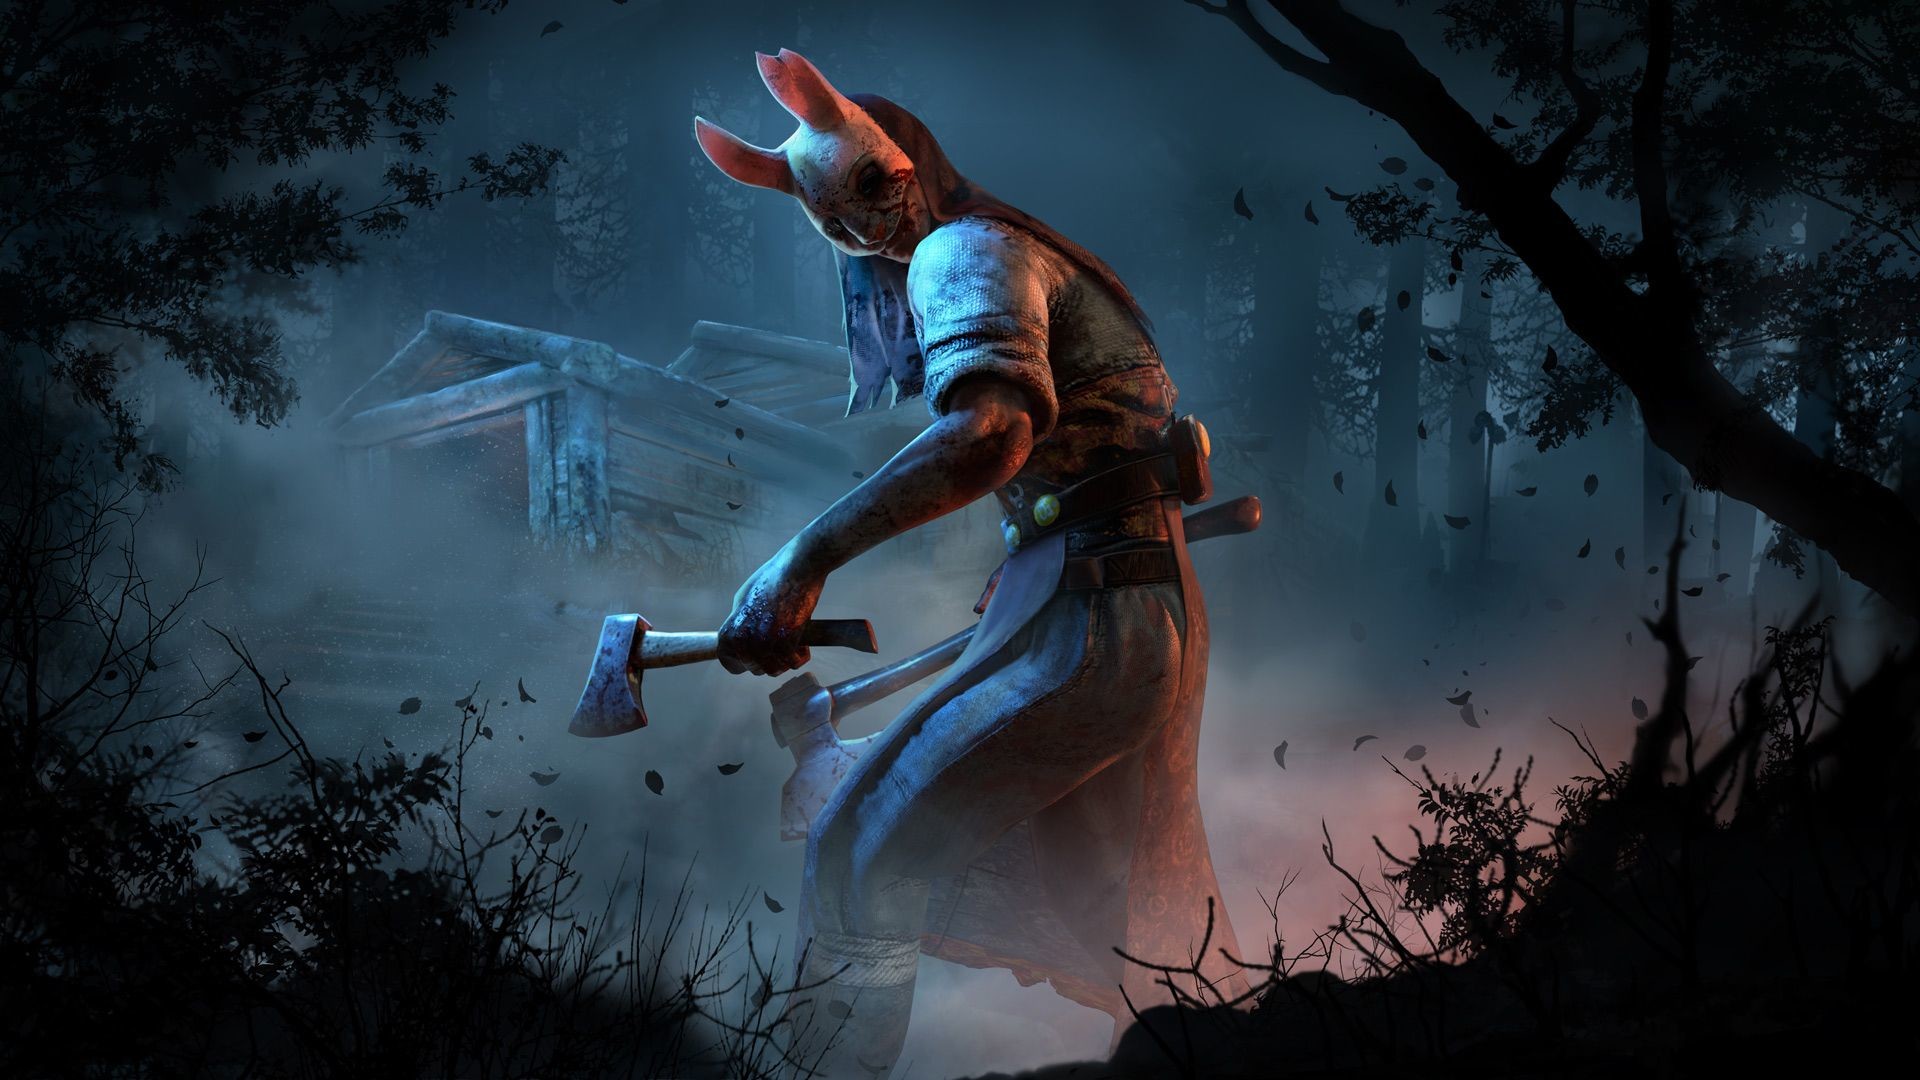 1920x1080 Image result for dead by daylight wallpaper the huntress